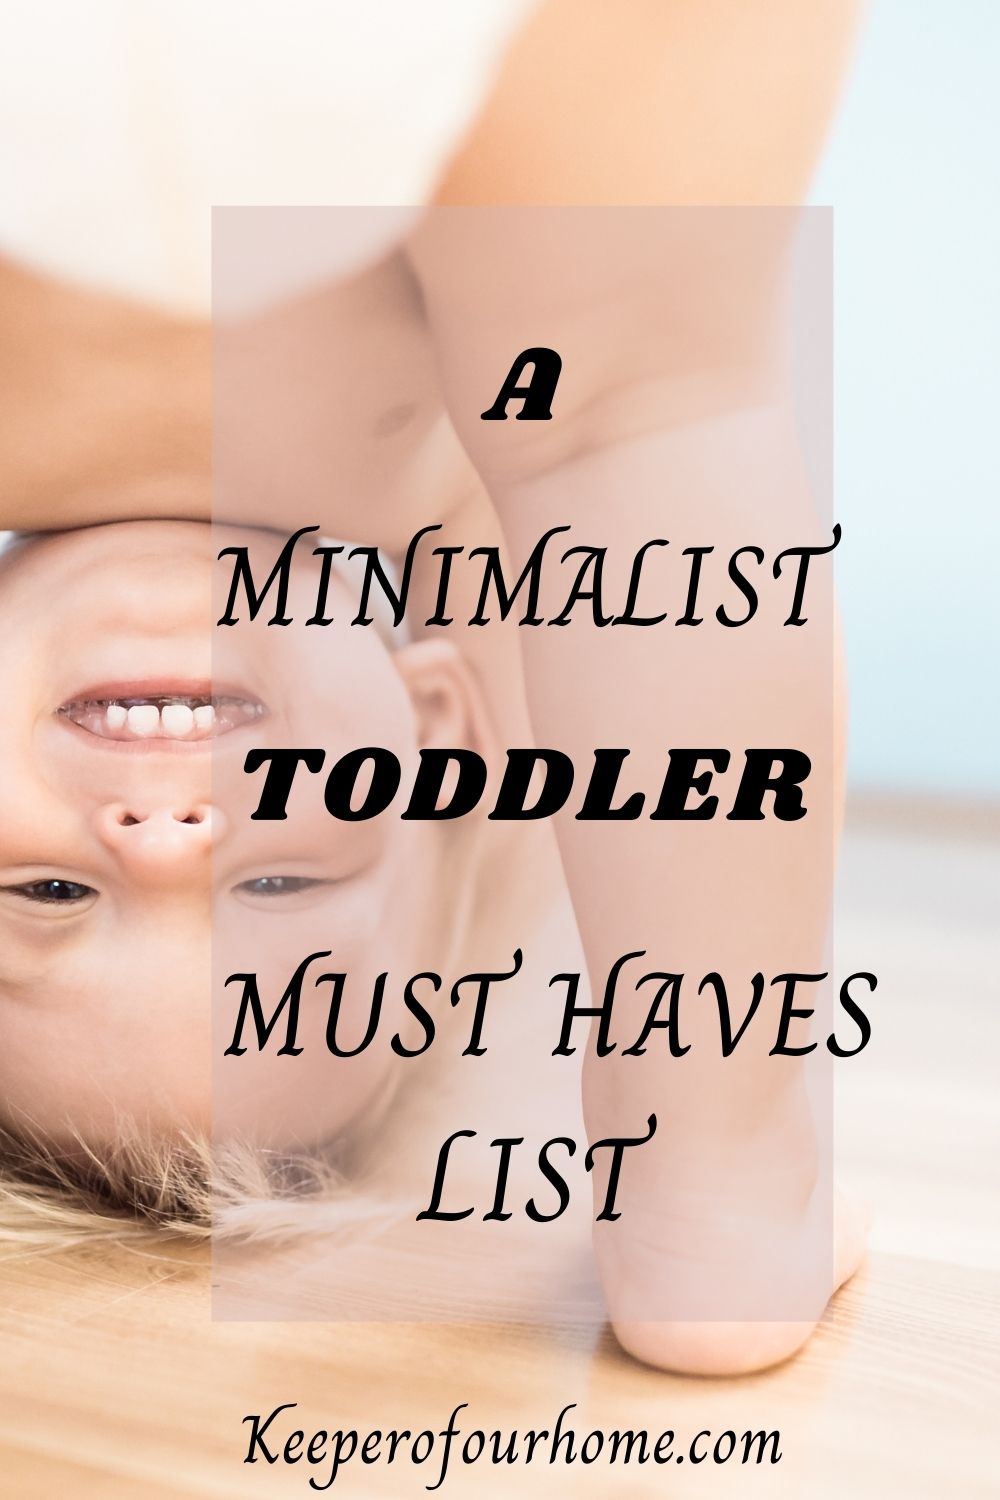 toddler must haves list pinterest graphic